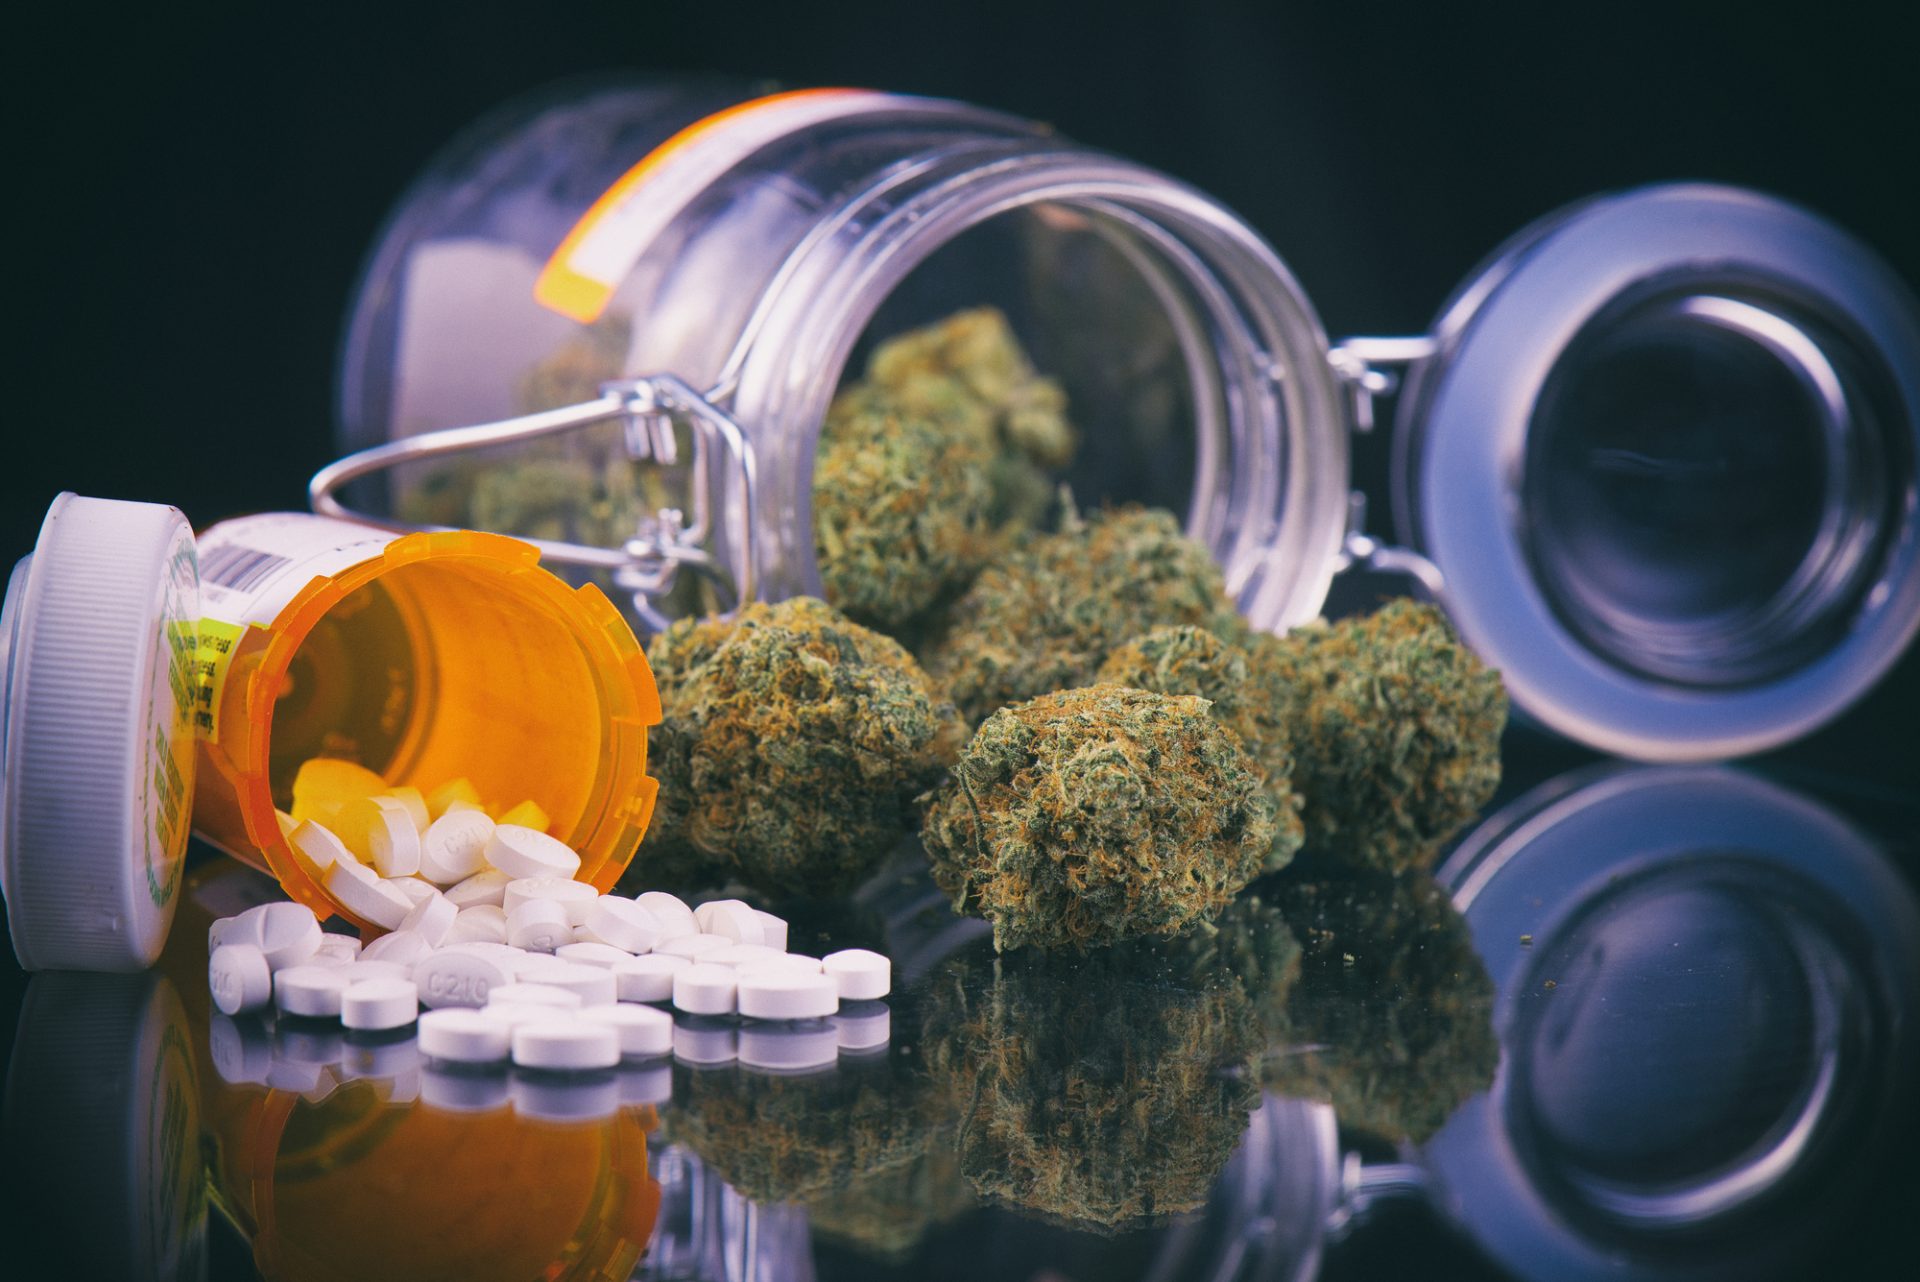 cannabis and drug interactions: Detail of cannabis buds and opioid pills over reflective surface - medical marijuana dispensary concept